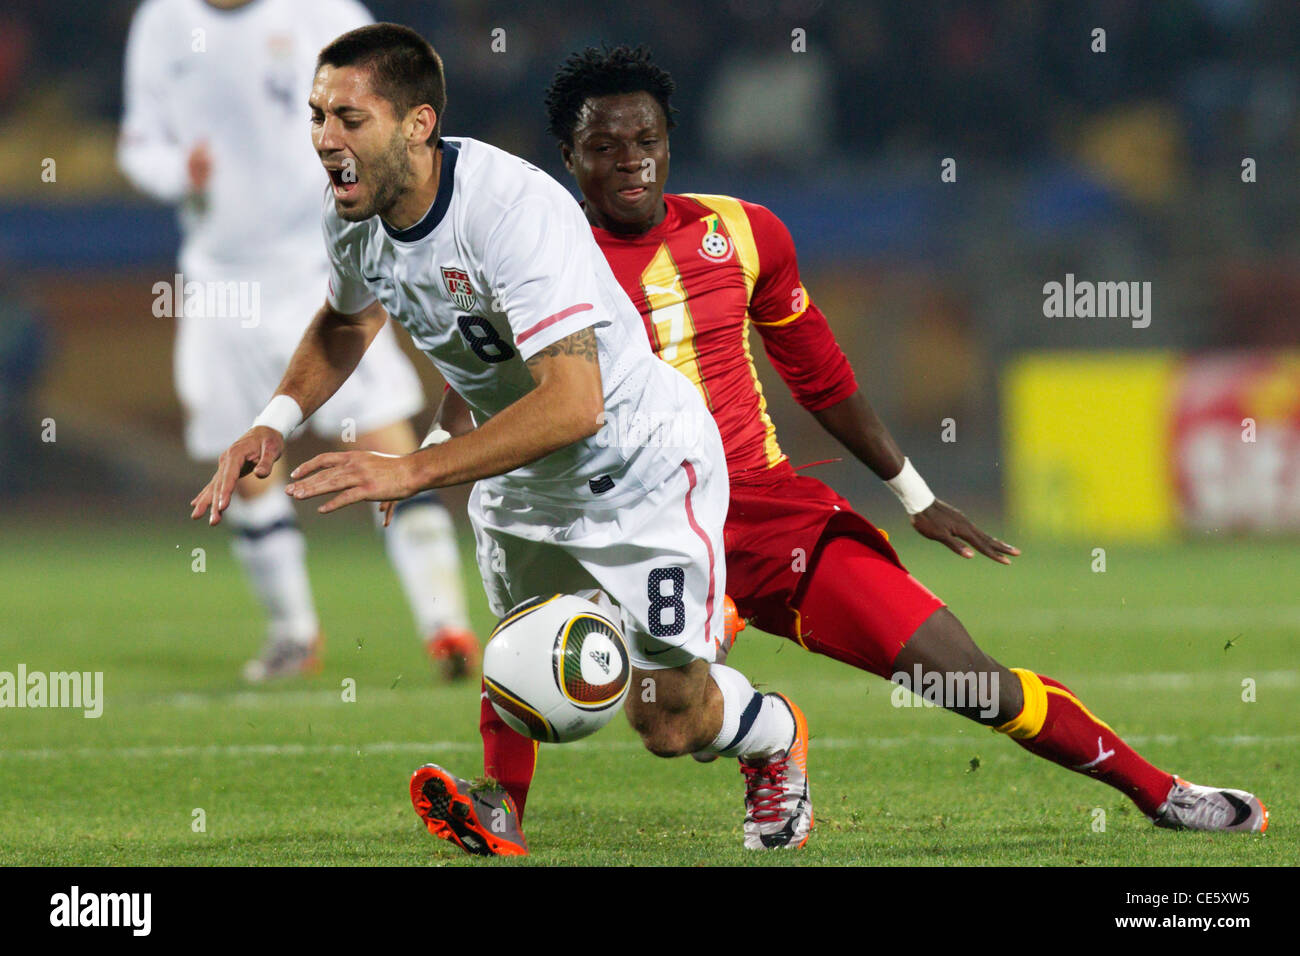 Samuel Inkoom of Ghana (R) tackles Clint Dempsey of the United States (L) during a 2010 FIFA World Cup round of 16 match. Stock Photo